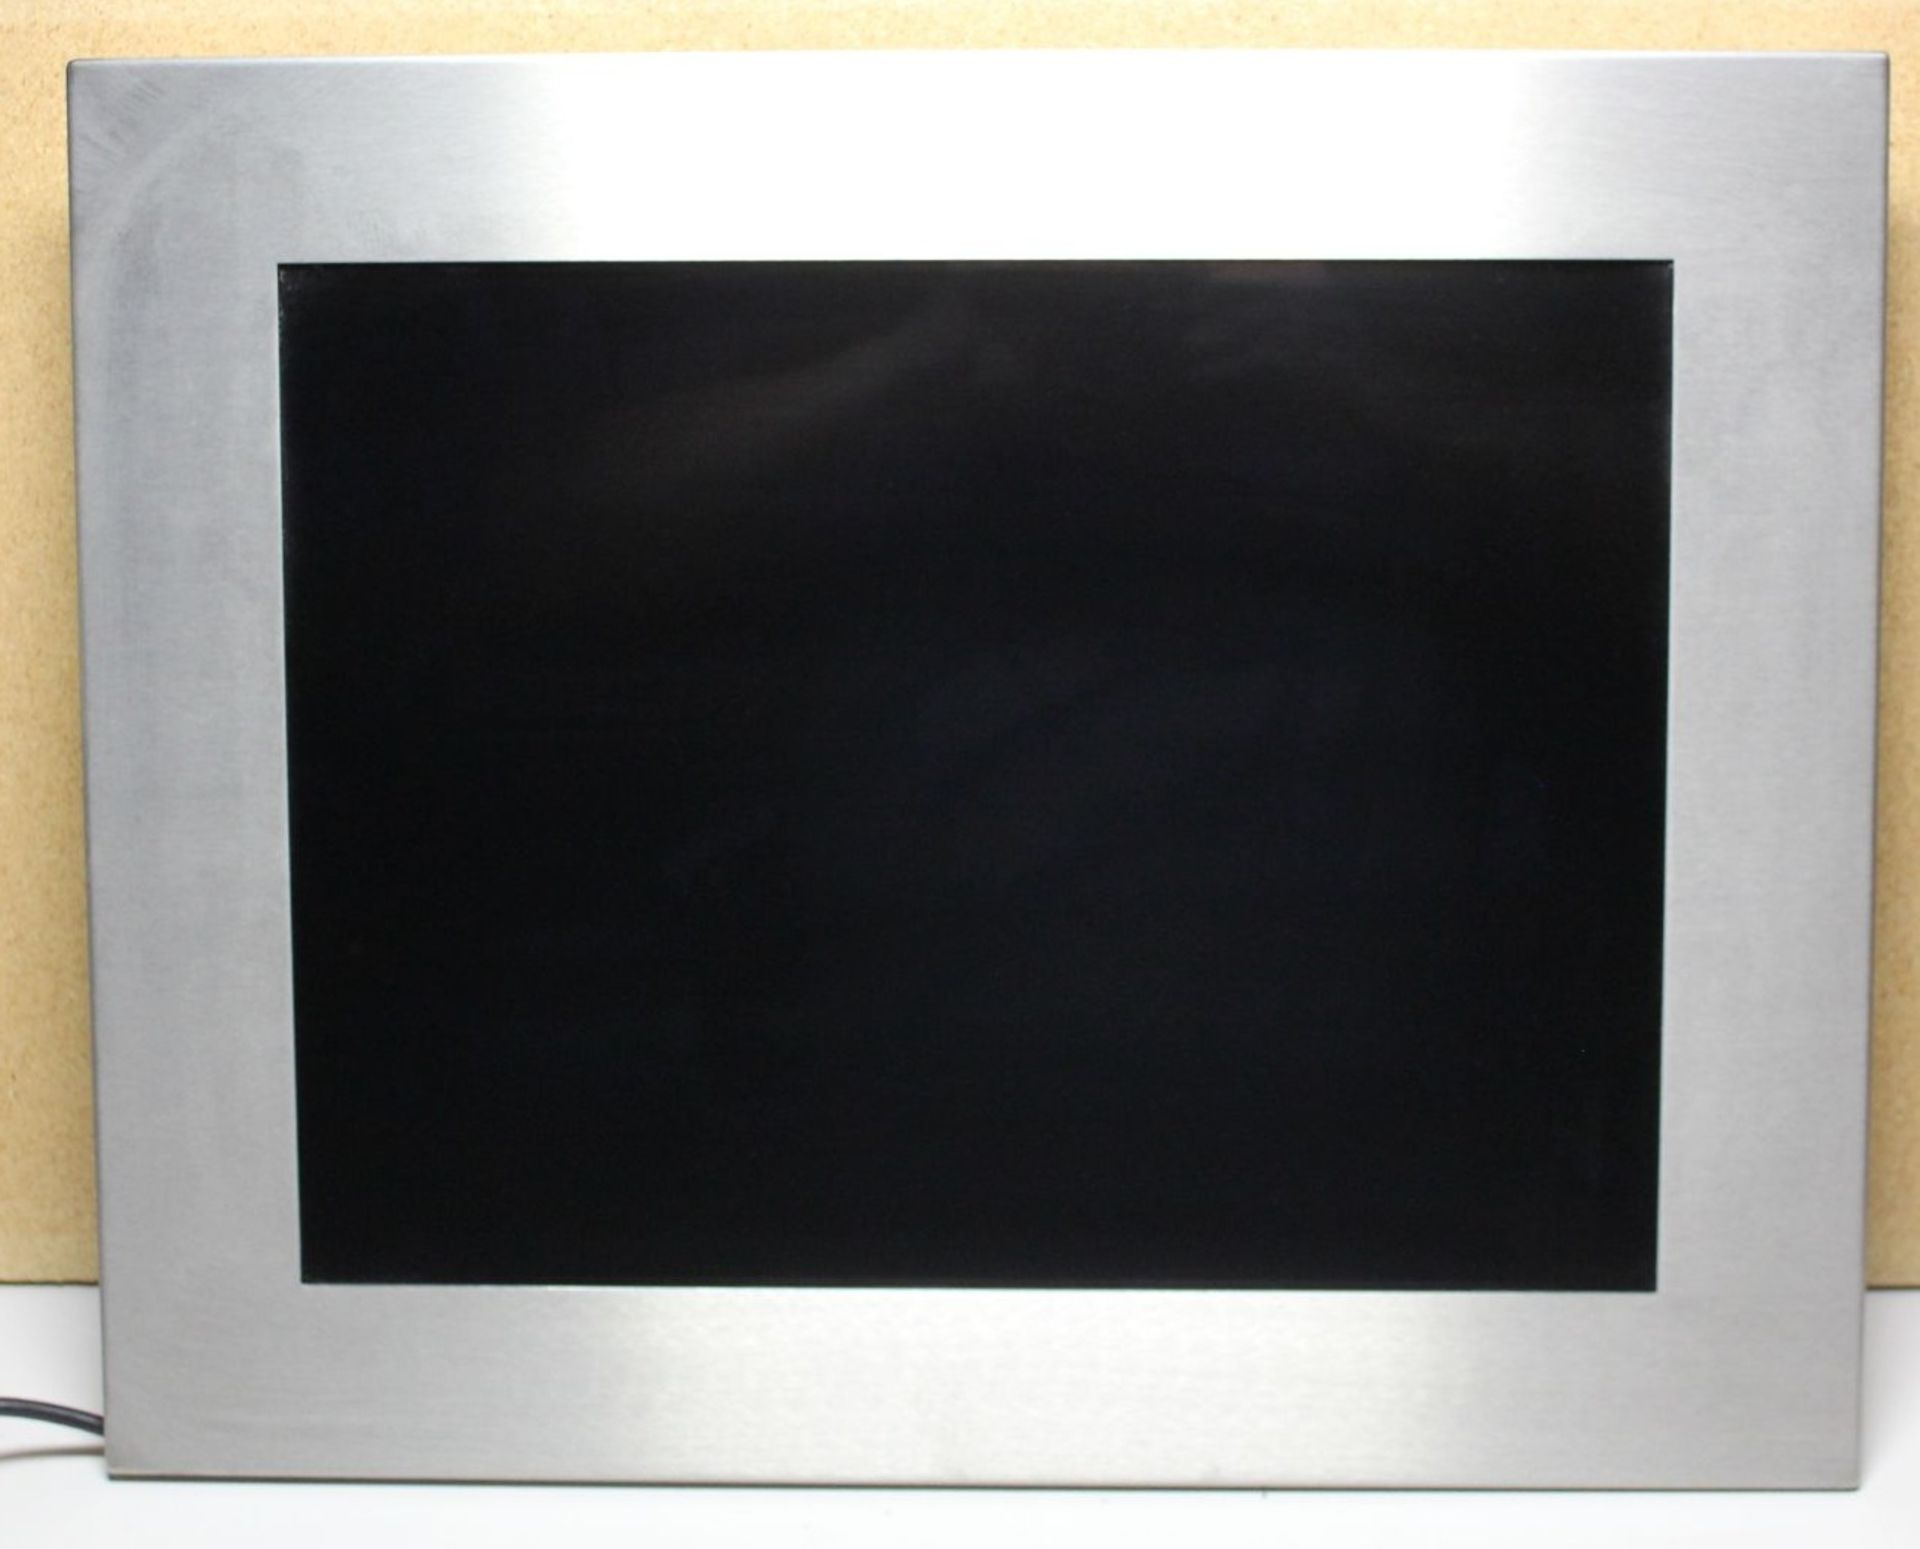 HOPE INDUSTRIAL 20" INDUSTRIAL MONITOR AND TOUCH SCREEN HMI - Image 3 of 9